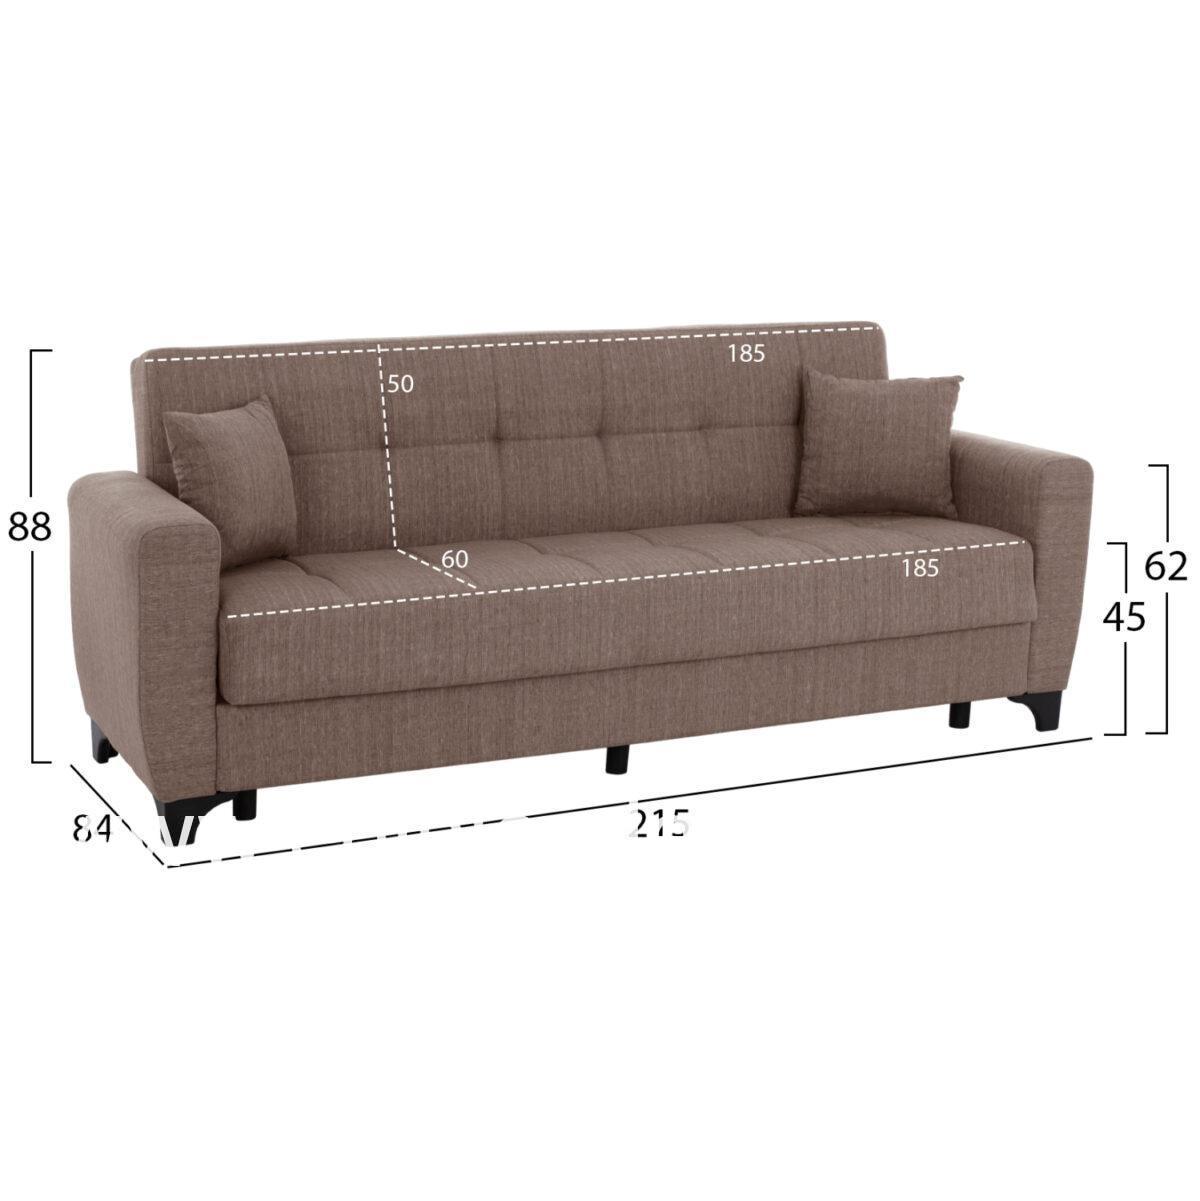 3-SEATER SOFA-BED